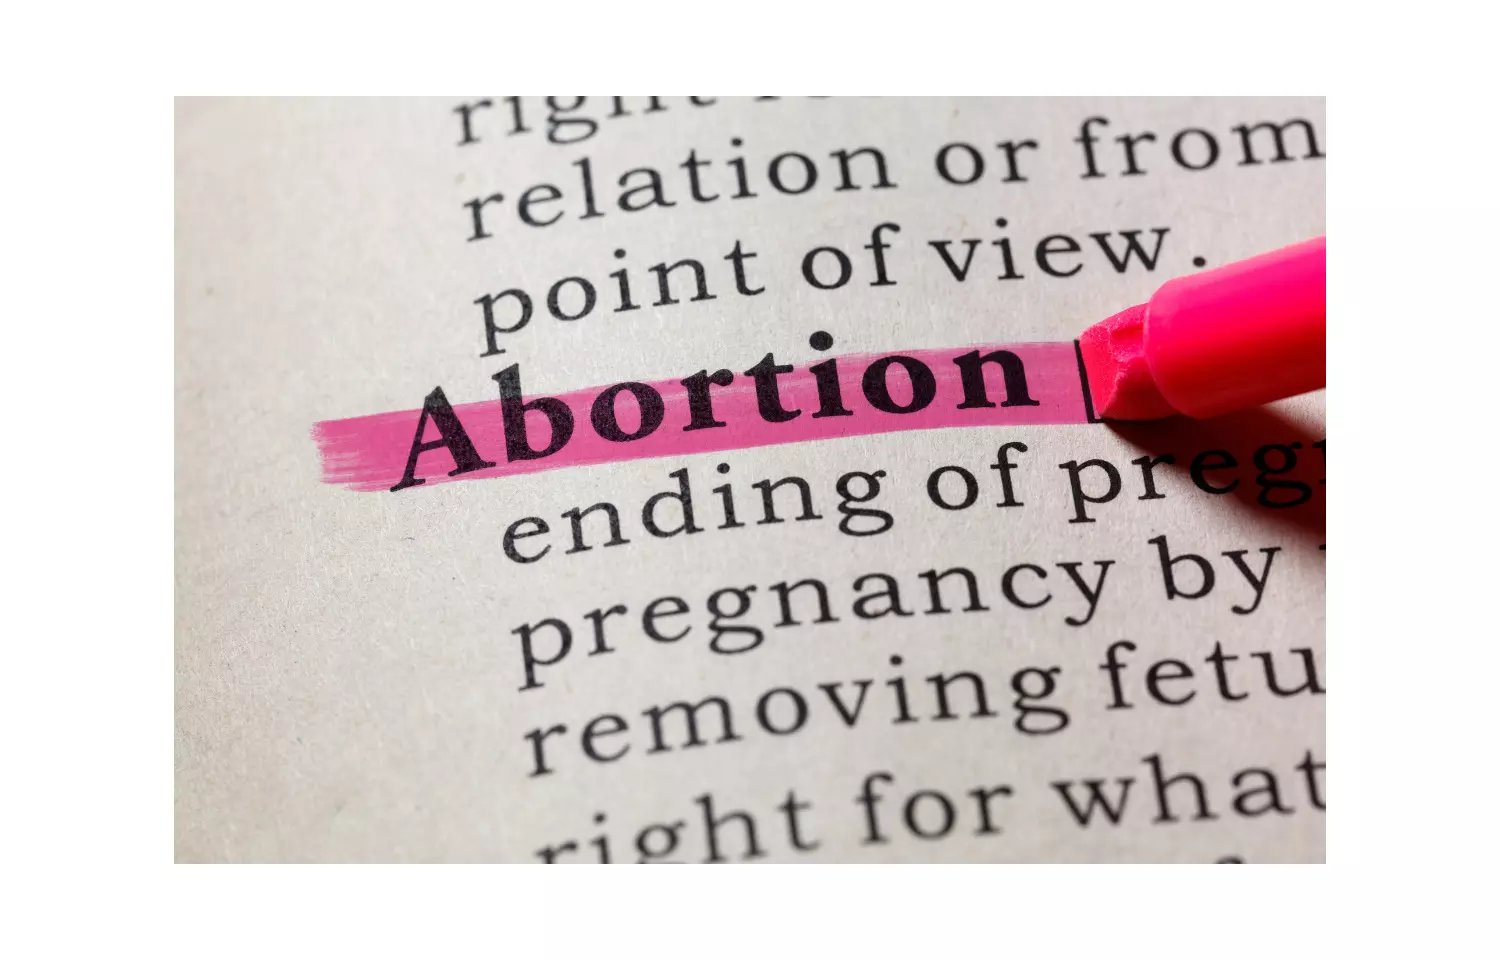 Self-managed medication abortion as effective as clinically managed one: Lancet study